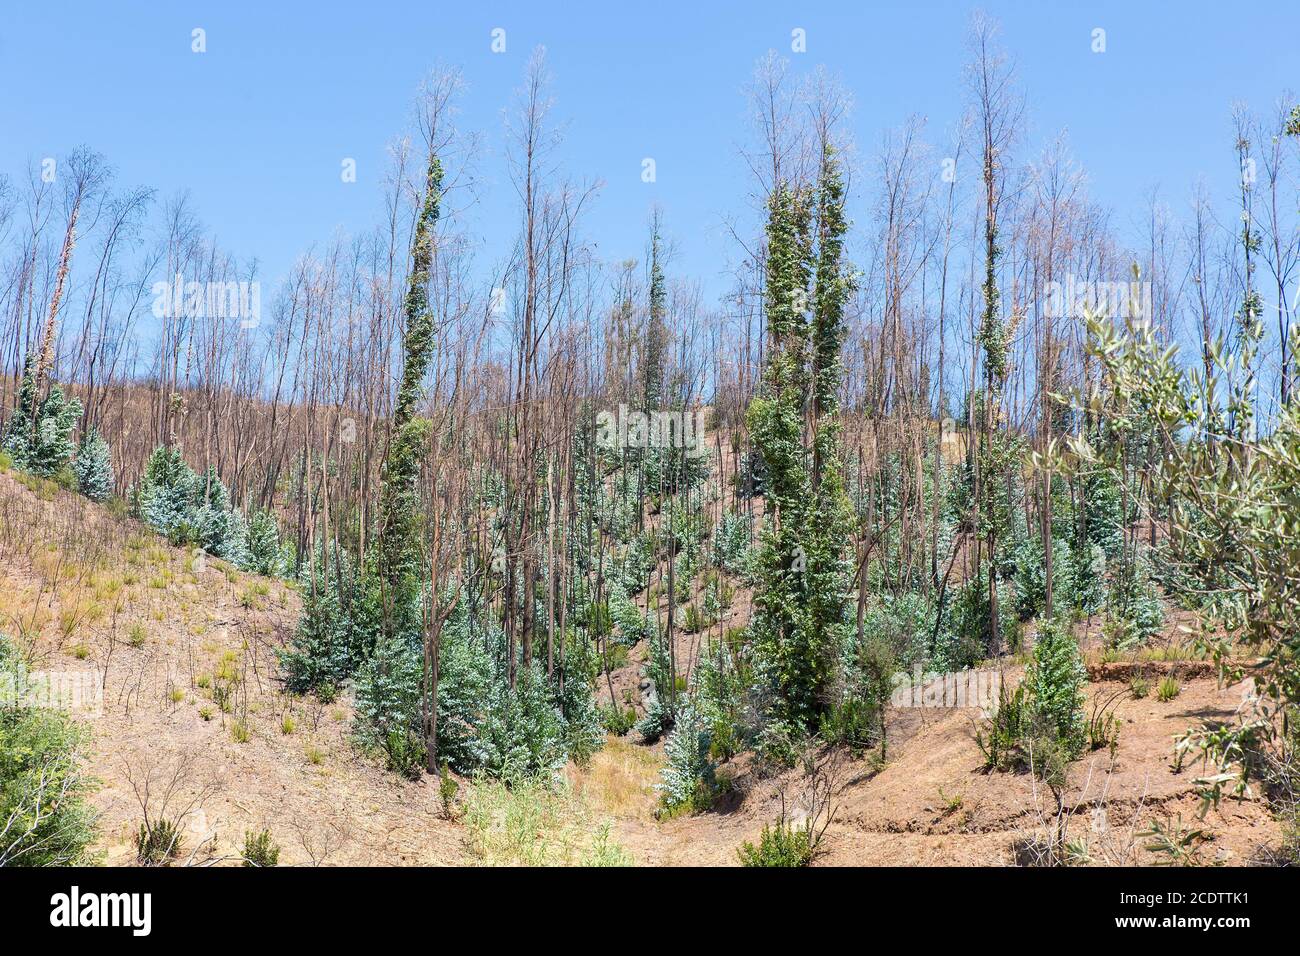 Burned and recovering eucalyptus trees in Portugal Stock Photo